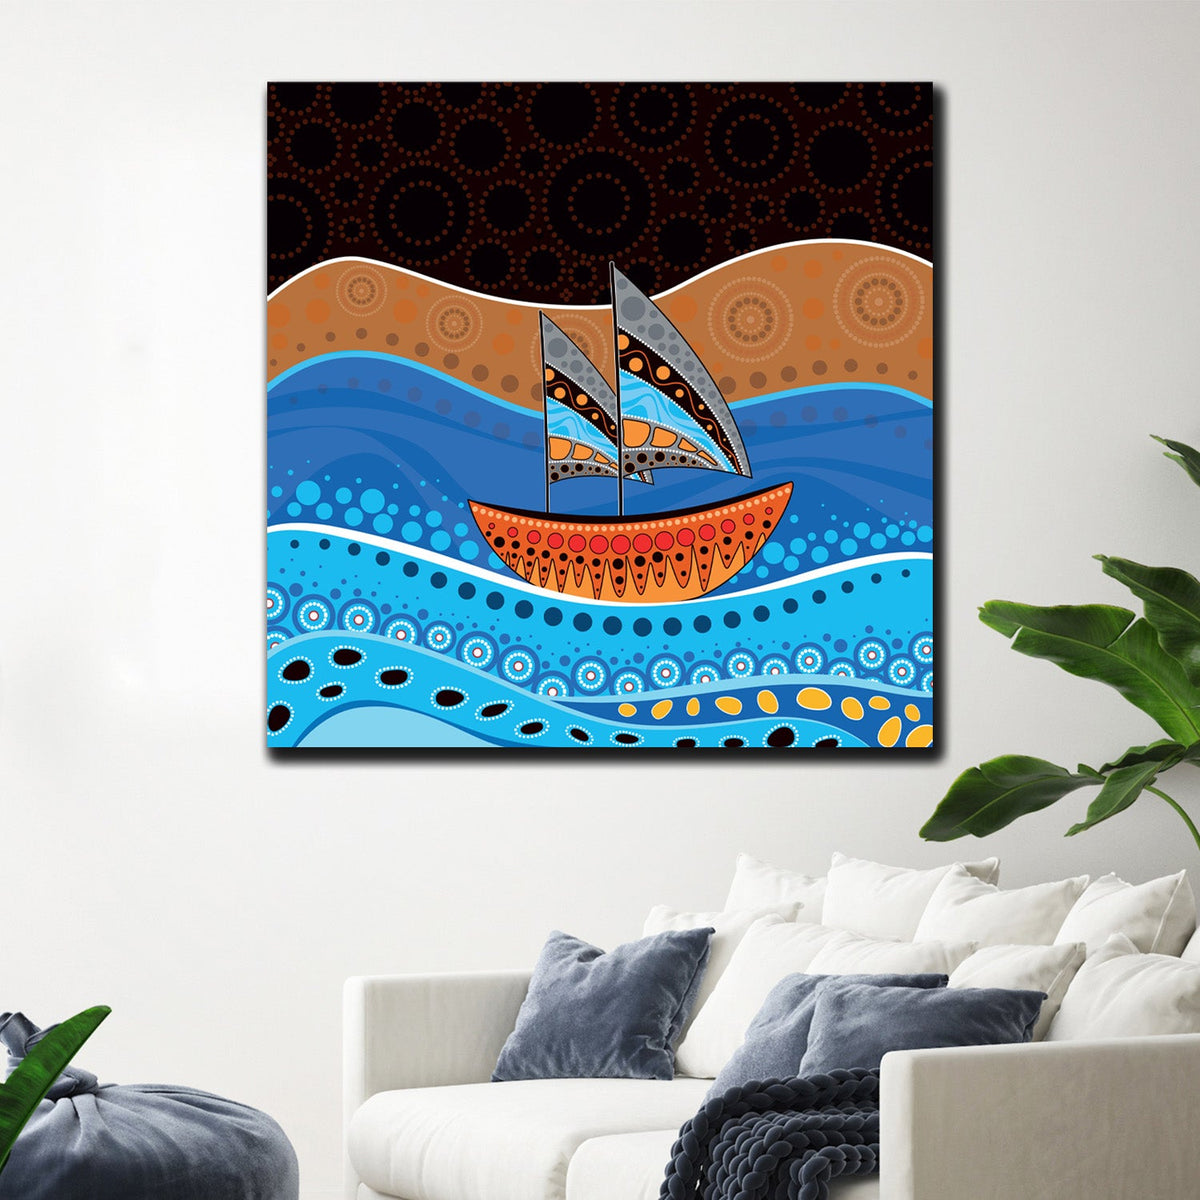 https://cdn.shopify.com/s/files/1/0387/9986/8044/products/BoatinSeaCanvasArtprintStretched-4.jpg